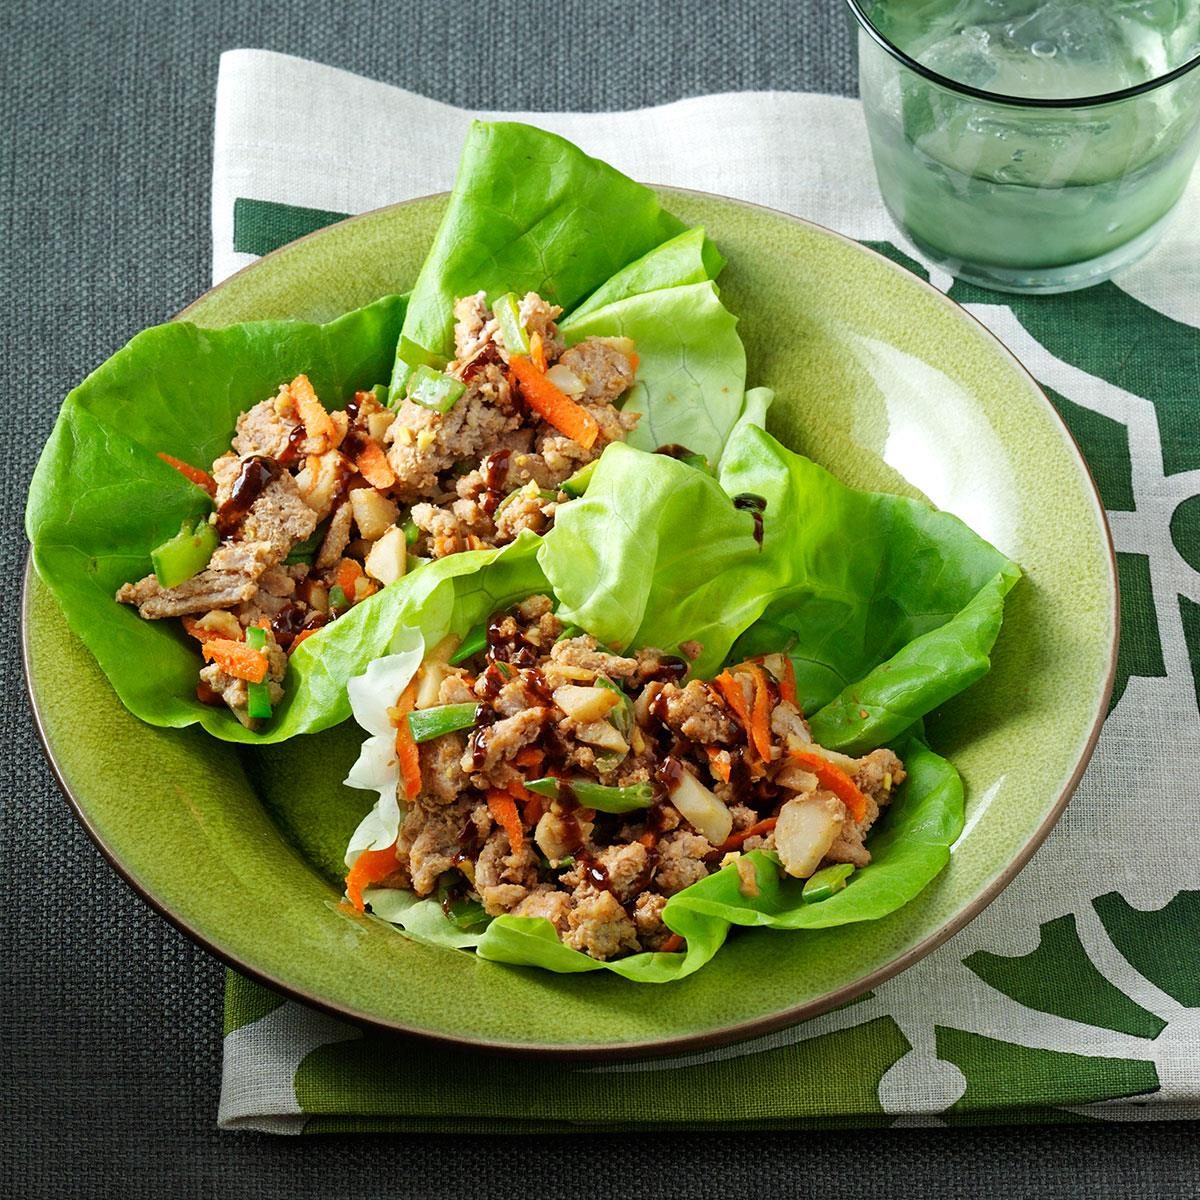 Day 7 Lunch: Peanutty Asian Lettuce Wraps